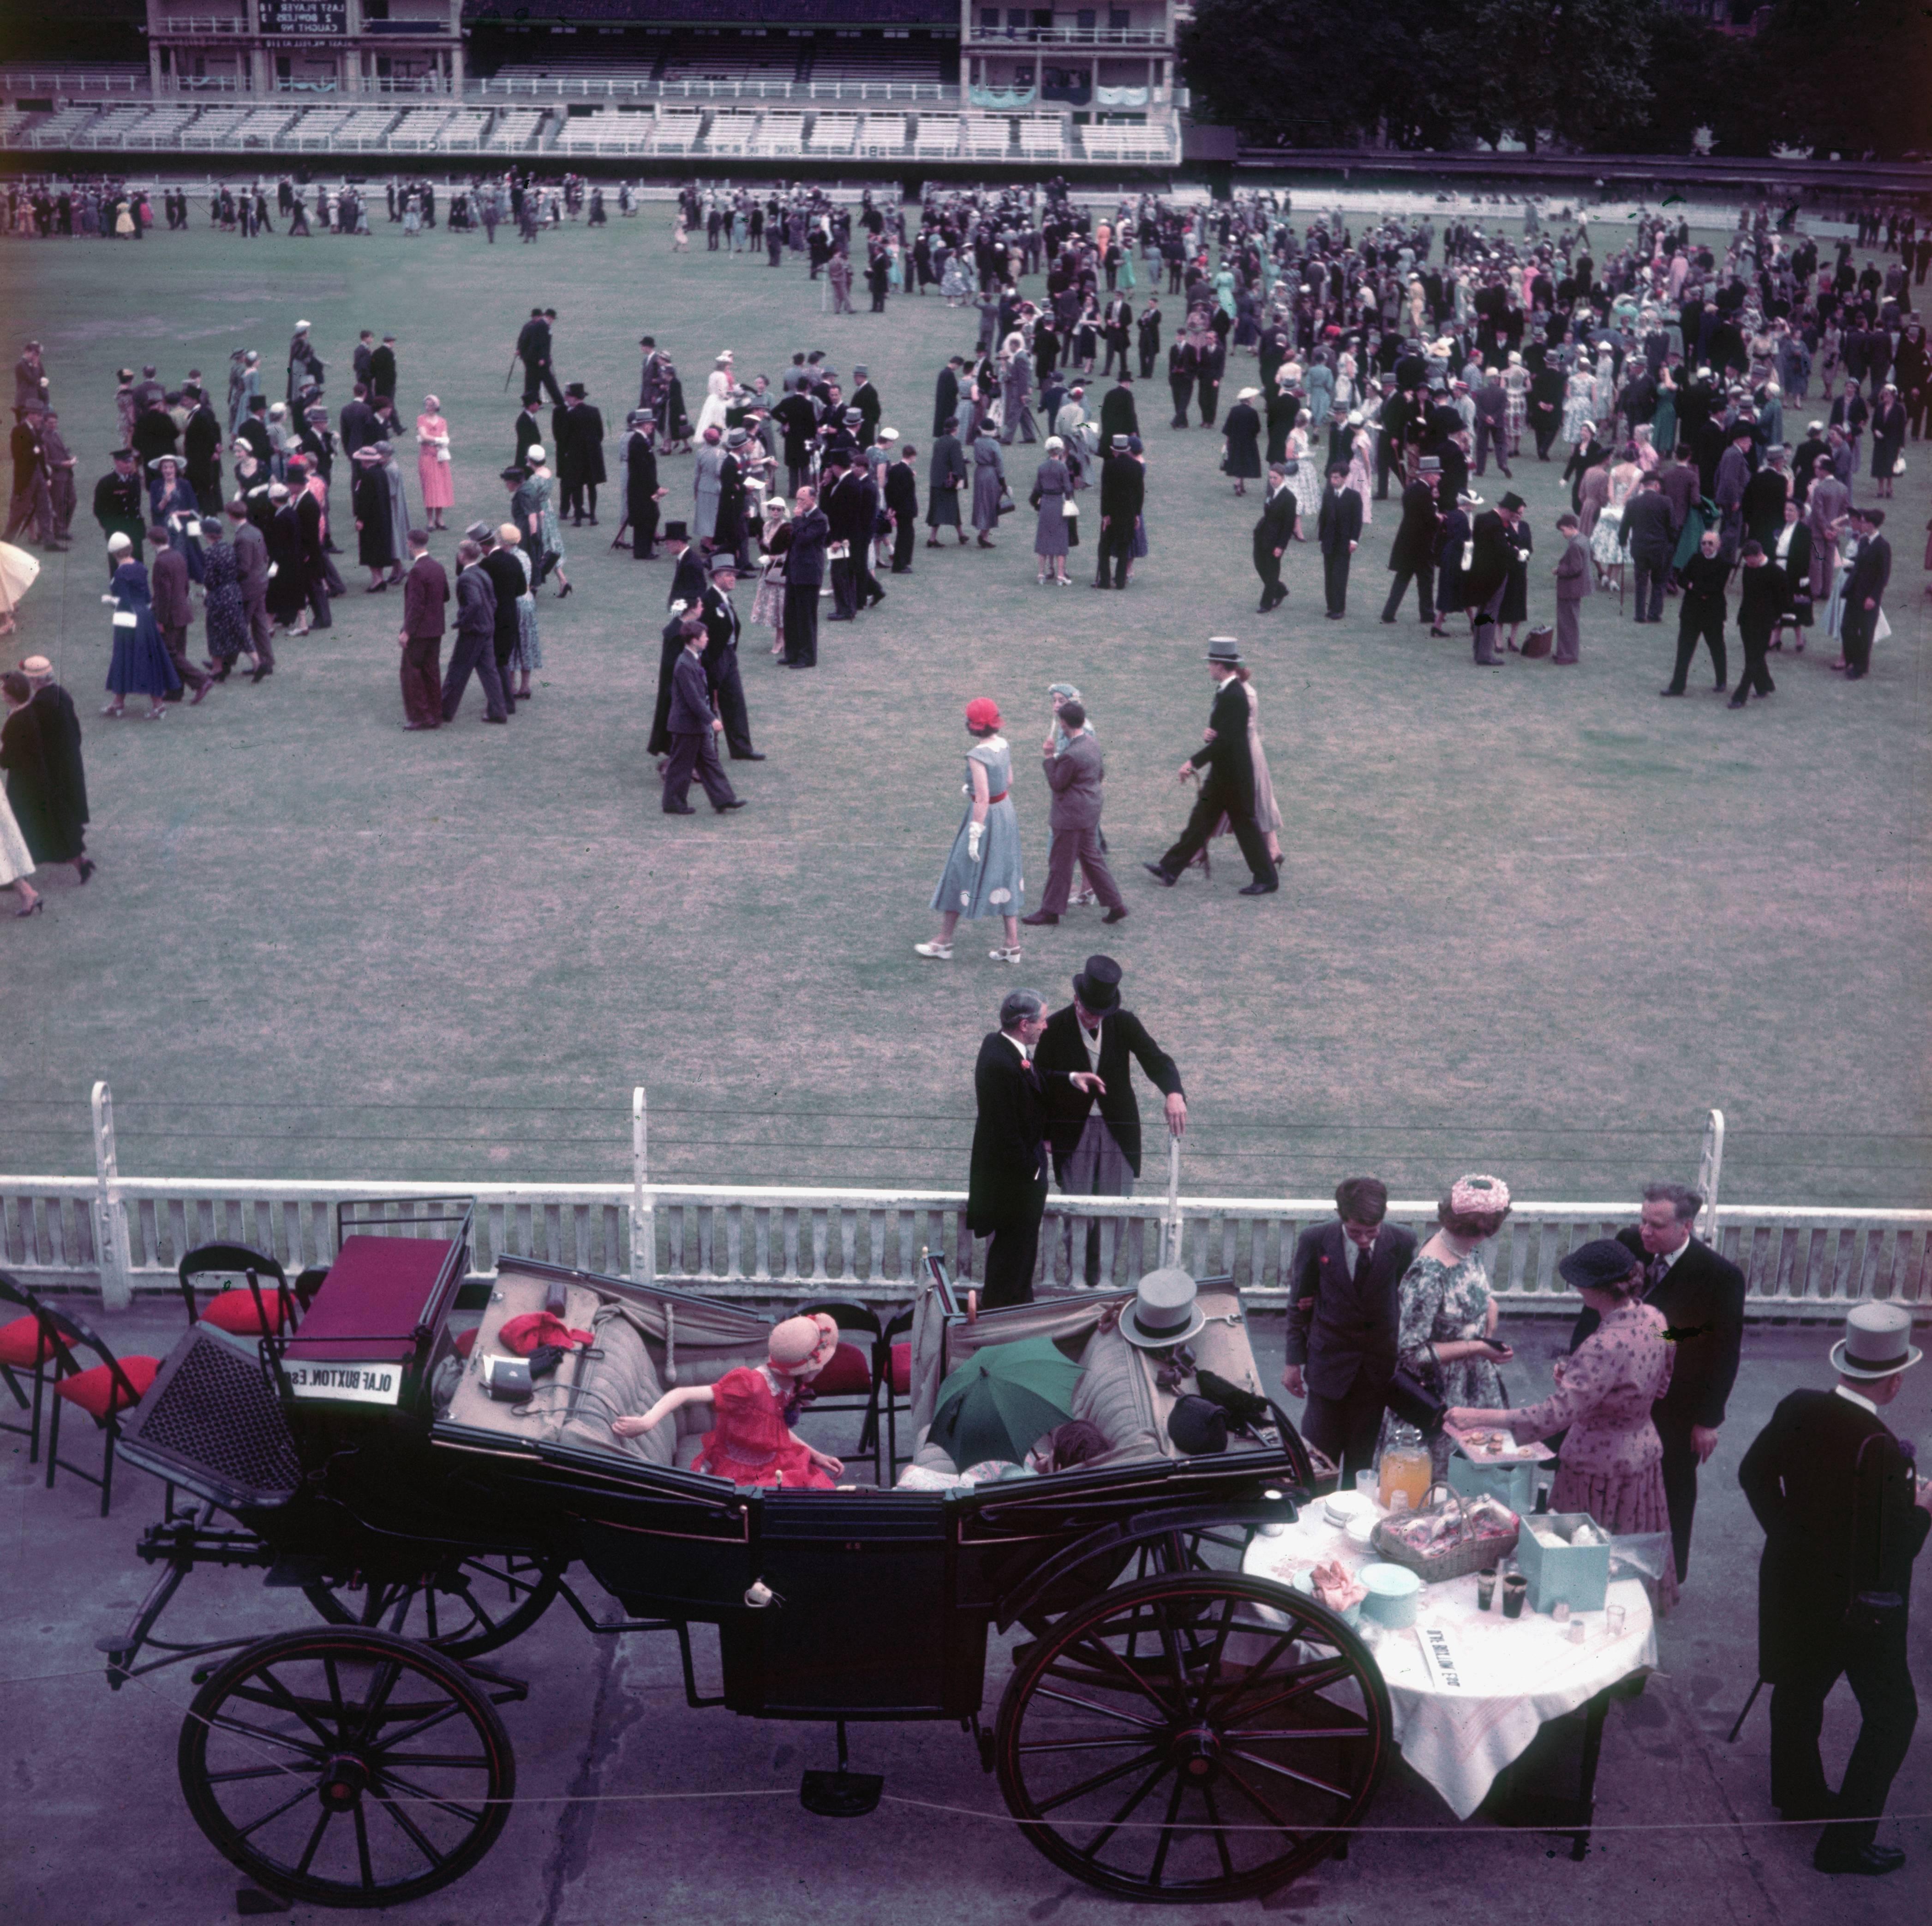 Slim Aarons Color Photograph - The Annual Eton-Harrow Match at Lord's, England 1955